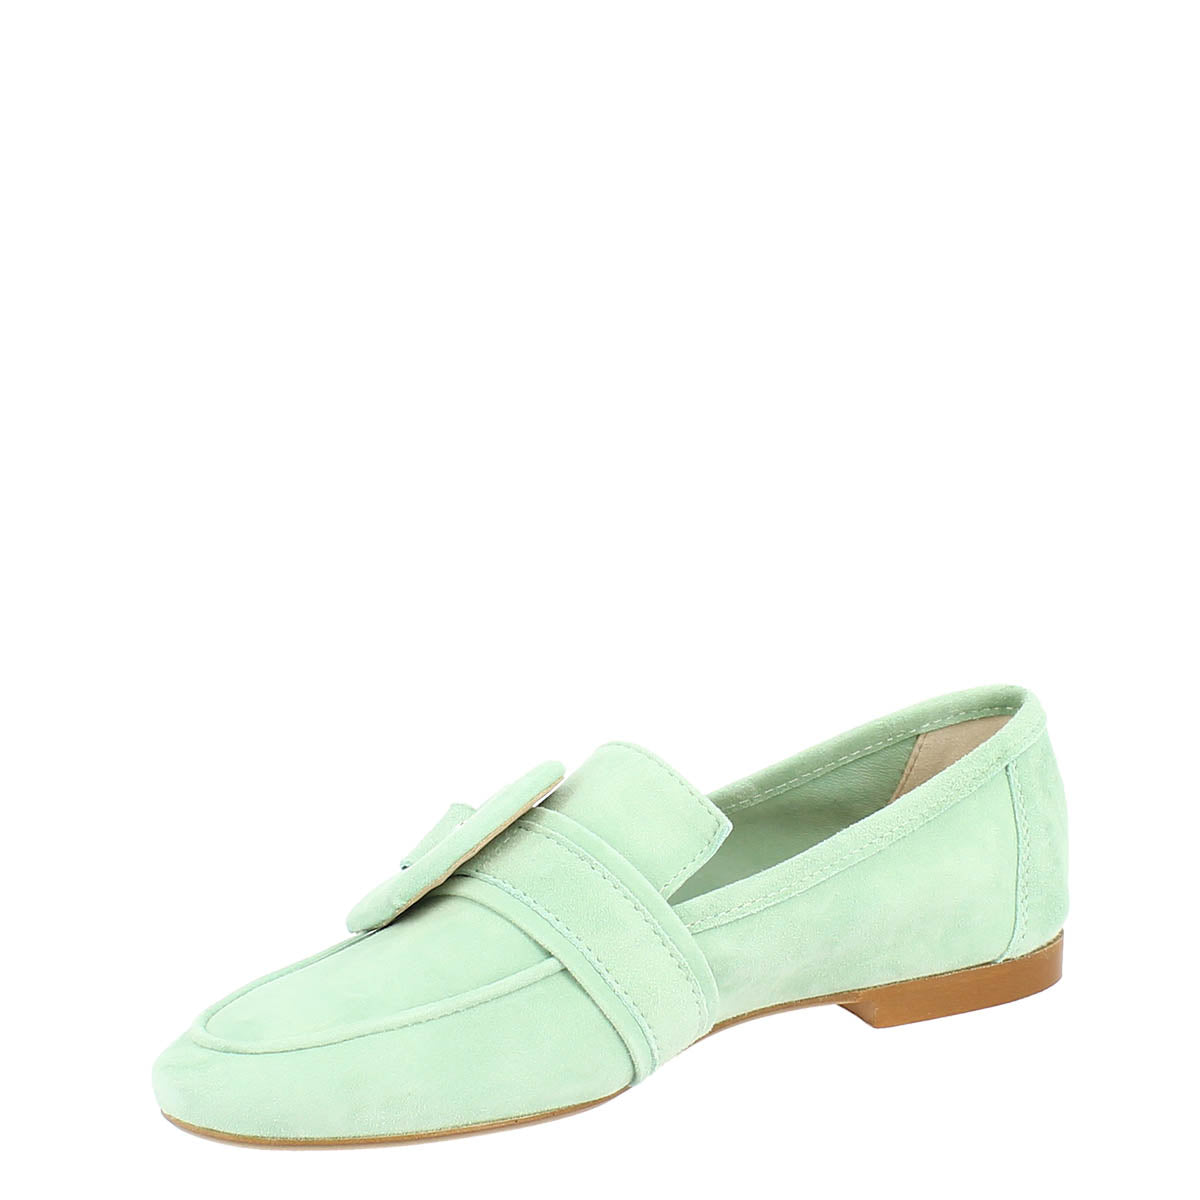 Women's moccasin in mint-colored suede.